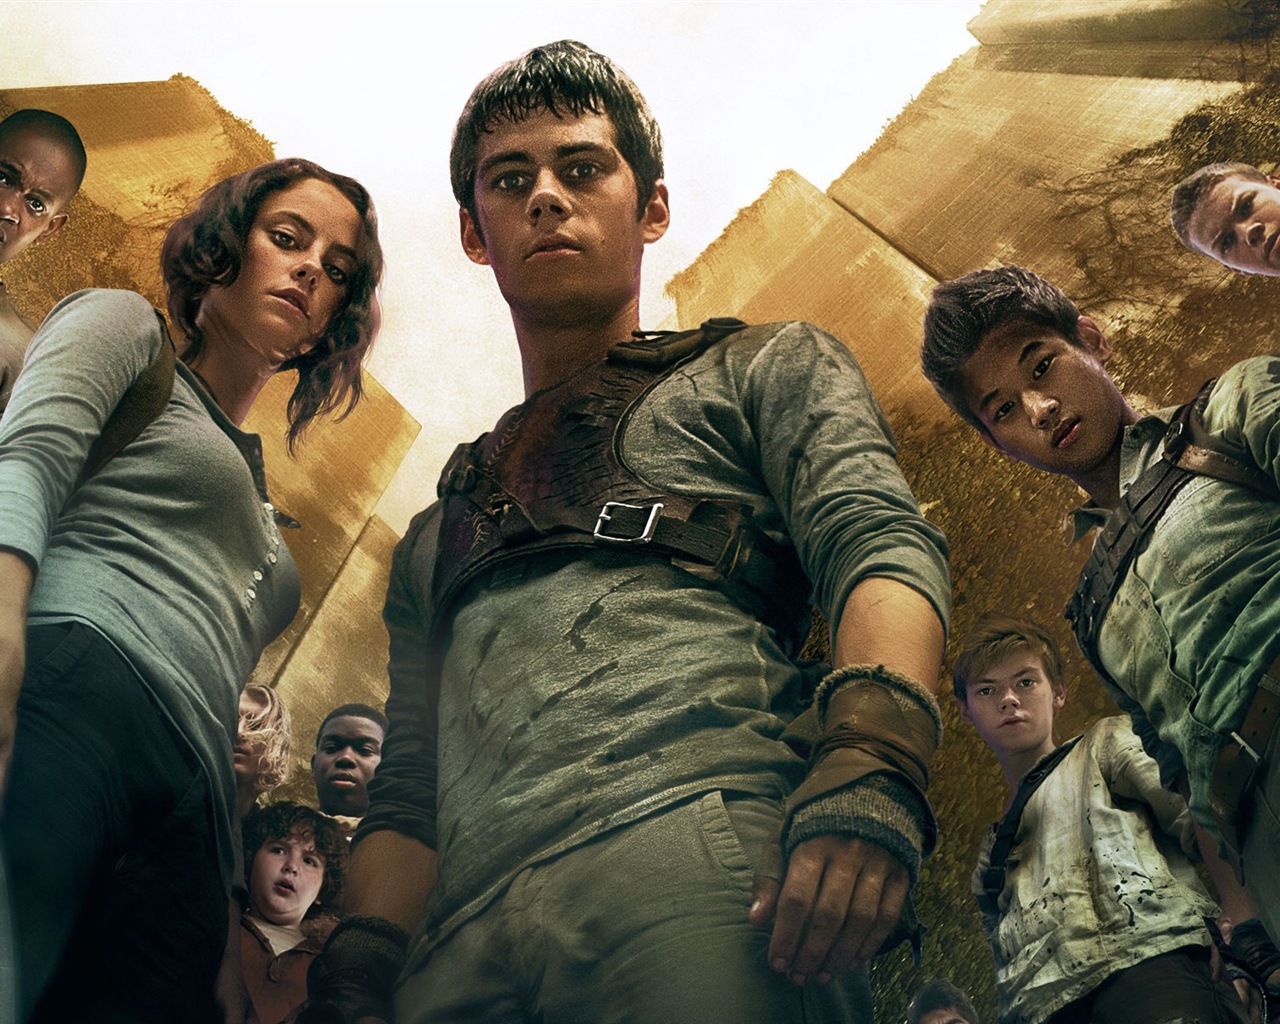 The Maze Runner HD movie wallpapers #3 - 1280x1024